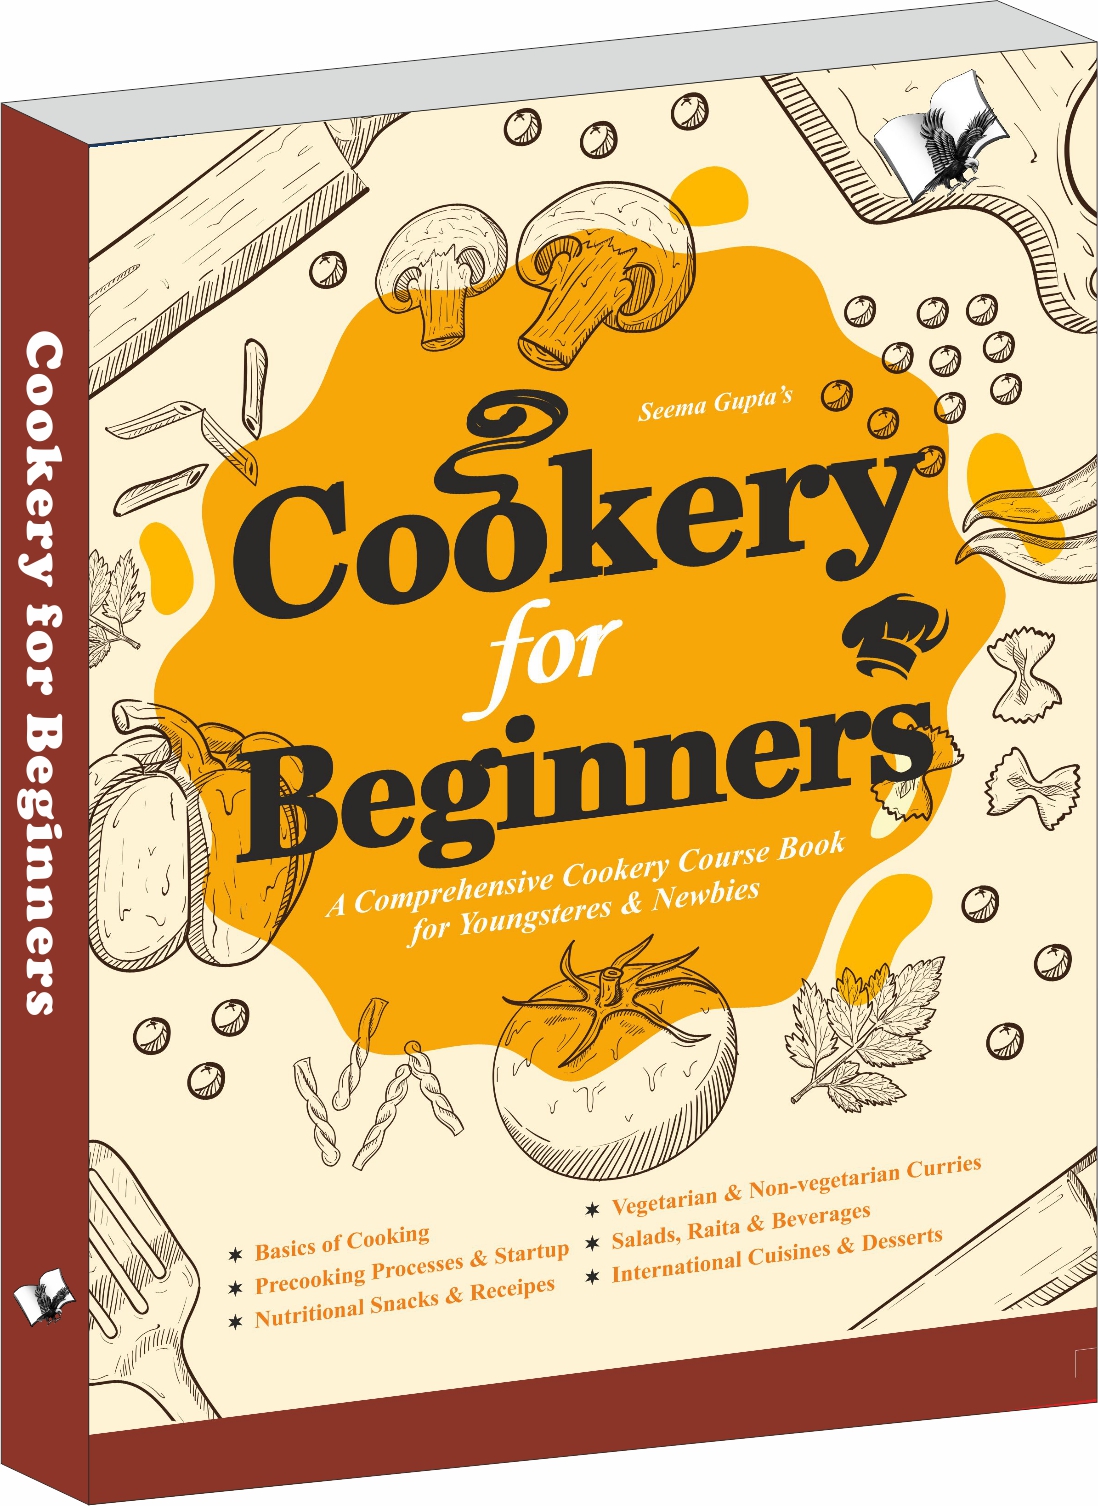 Cookery For Beginners-A Comprehensive Cookery Course Book for Youngsters & Newbies